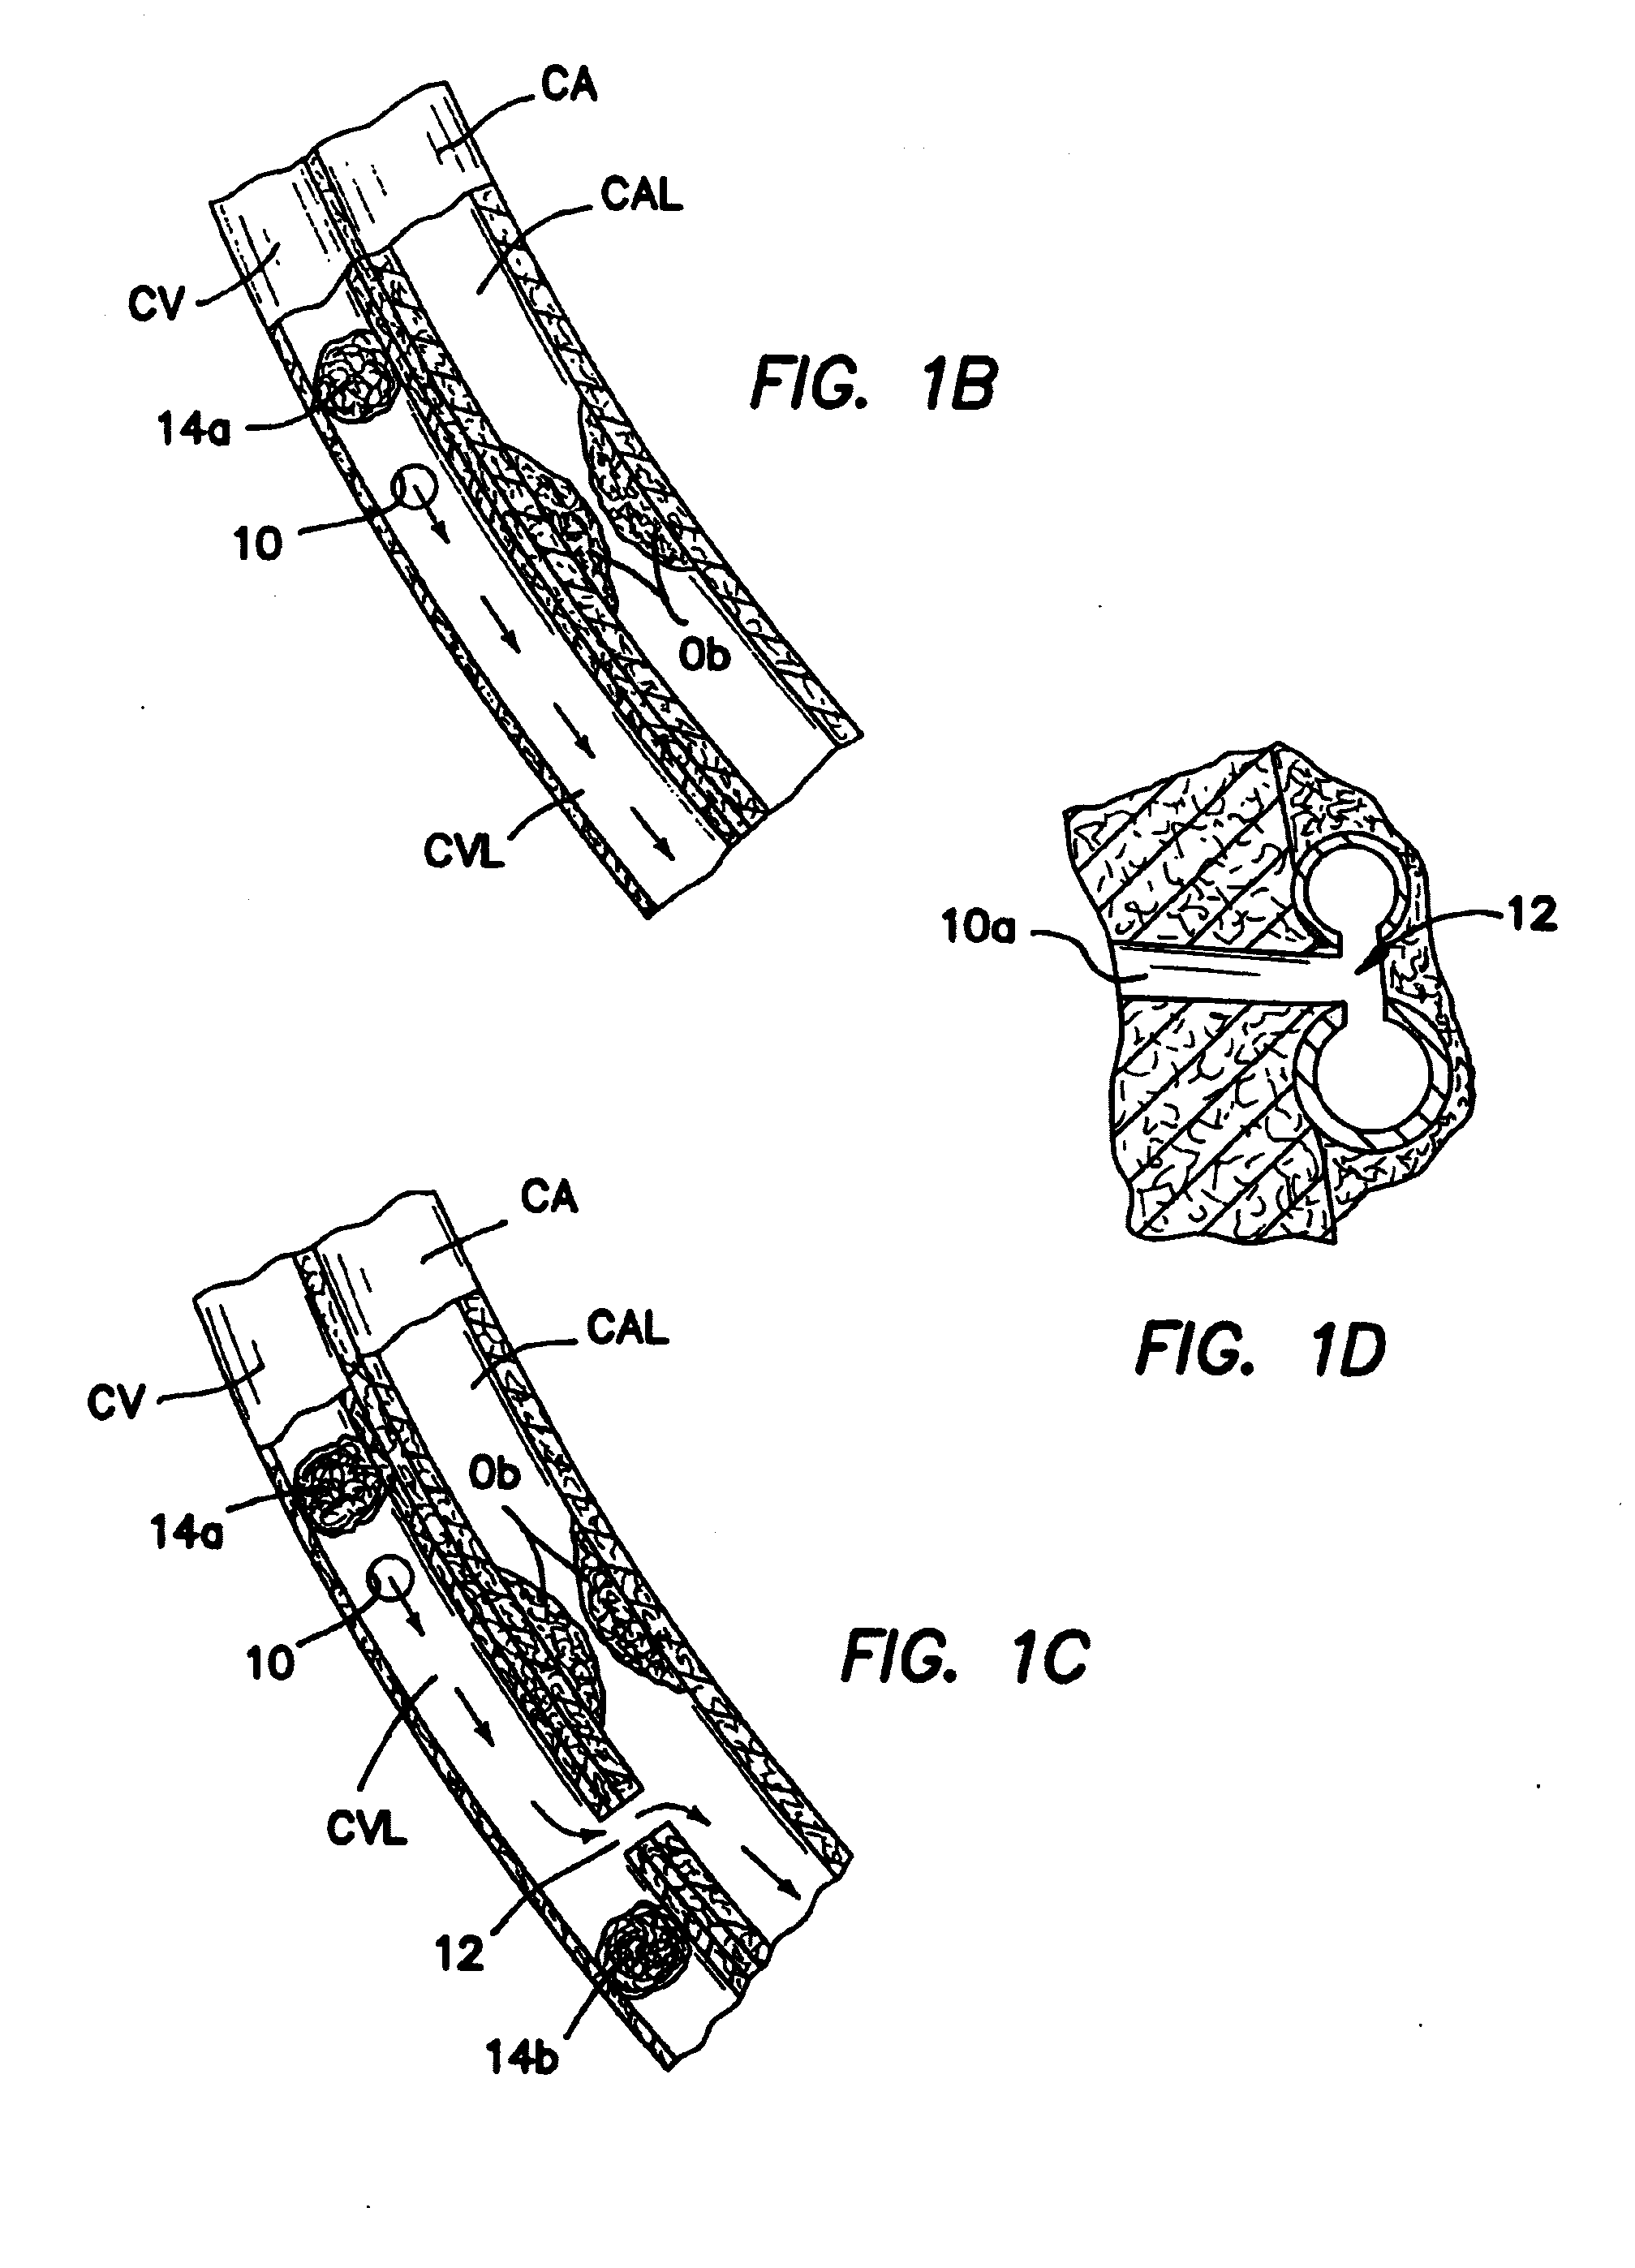 Methods and apparatus for transmyocardial direct coronary revascularization